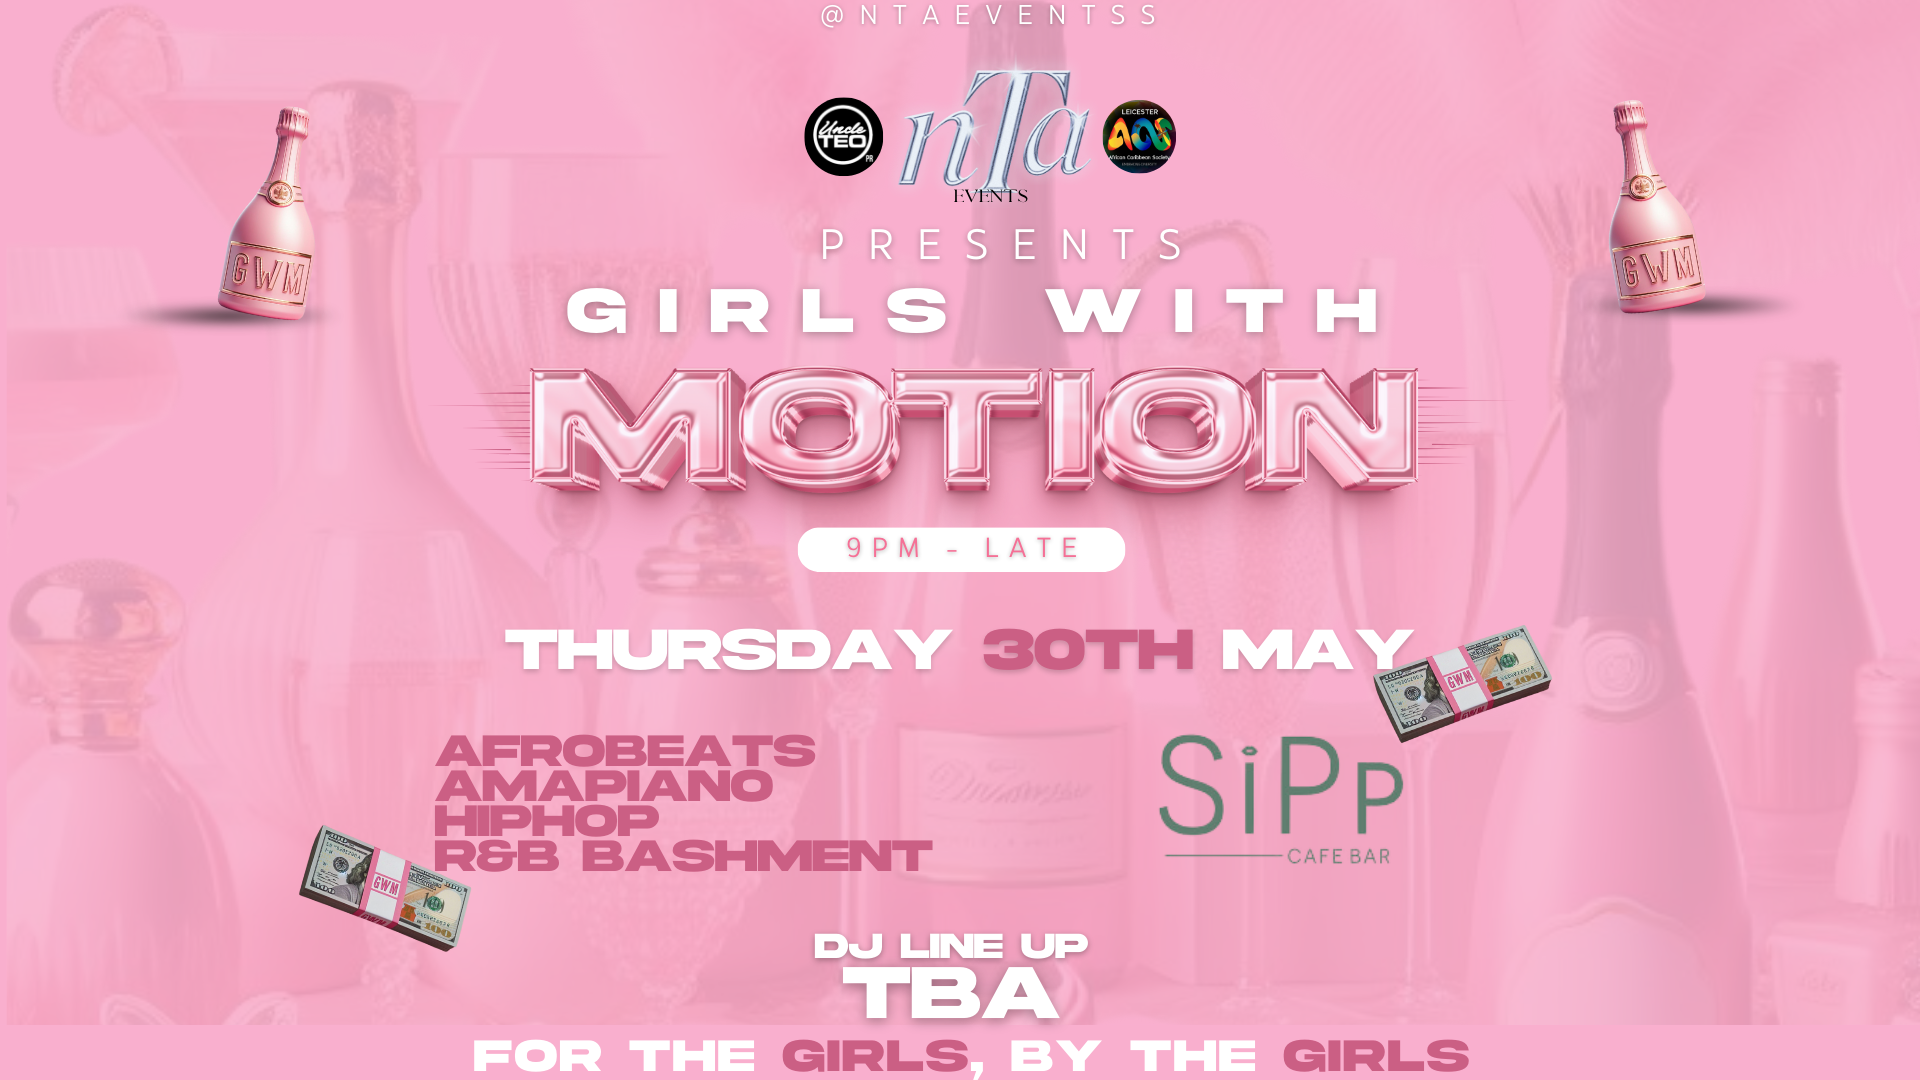 Girls With Motion – #ForThe Girls, By the Girls